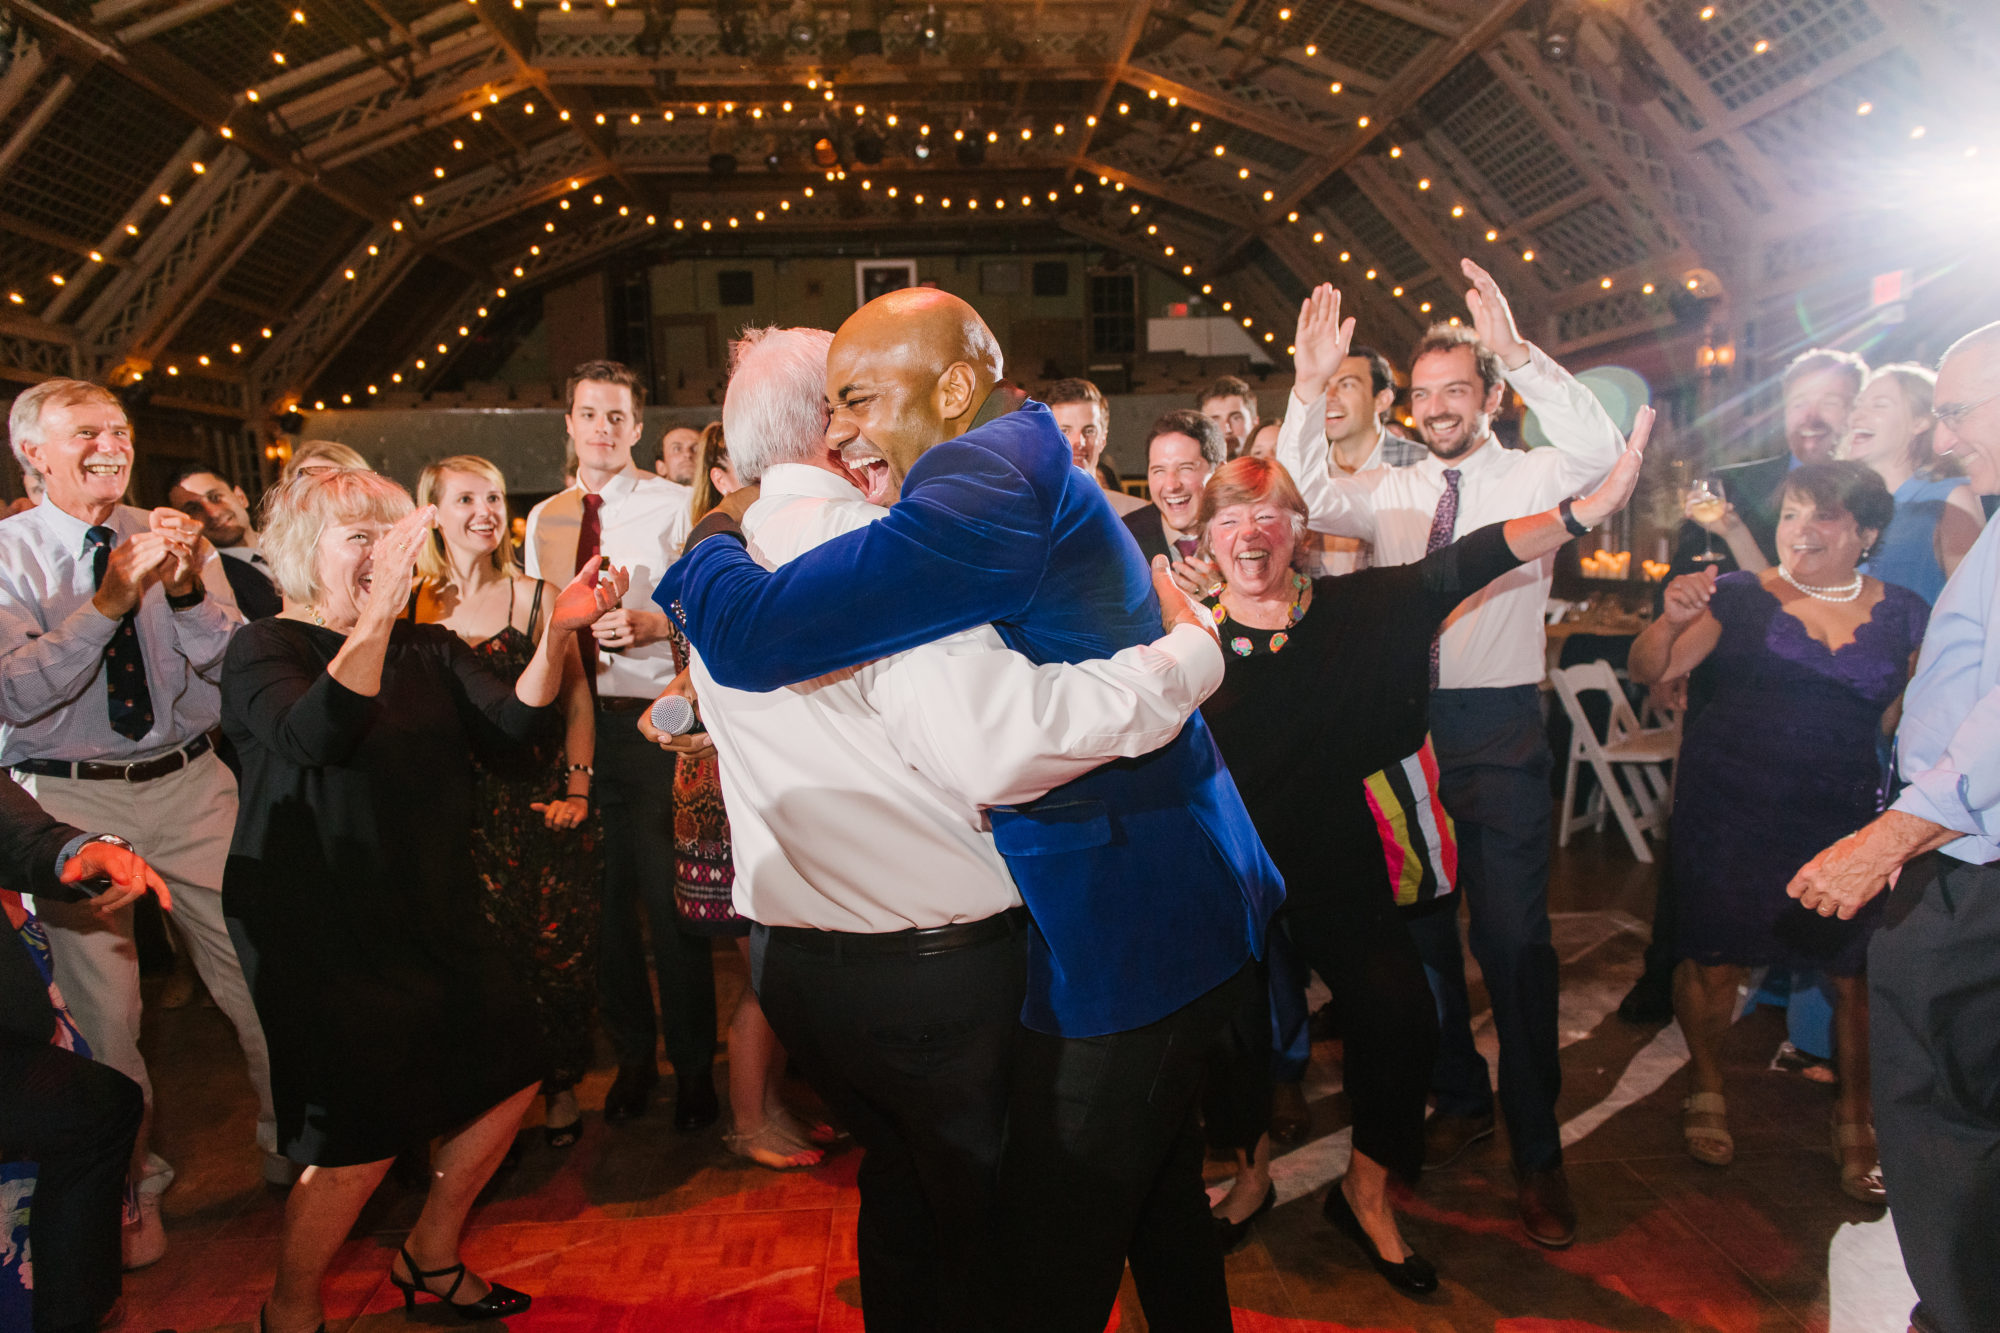 Wedding Photography Tips: How to Take Gorgeous Indoor Wedding Photos by popular New England photographer, Shannon Shipman: image of two men hugging each other while being surrounded by a lot of people. 